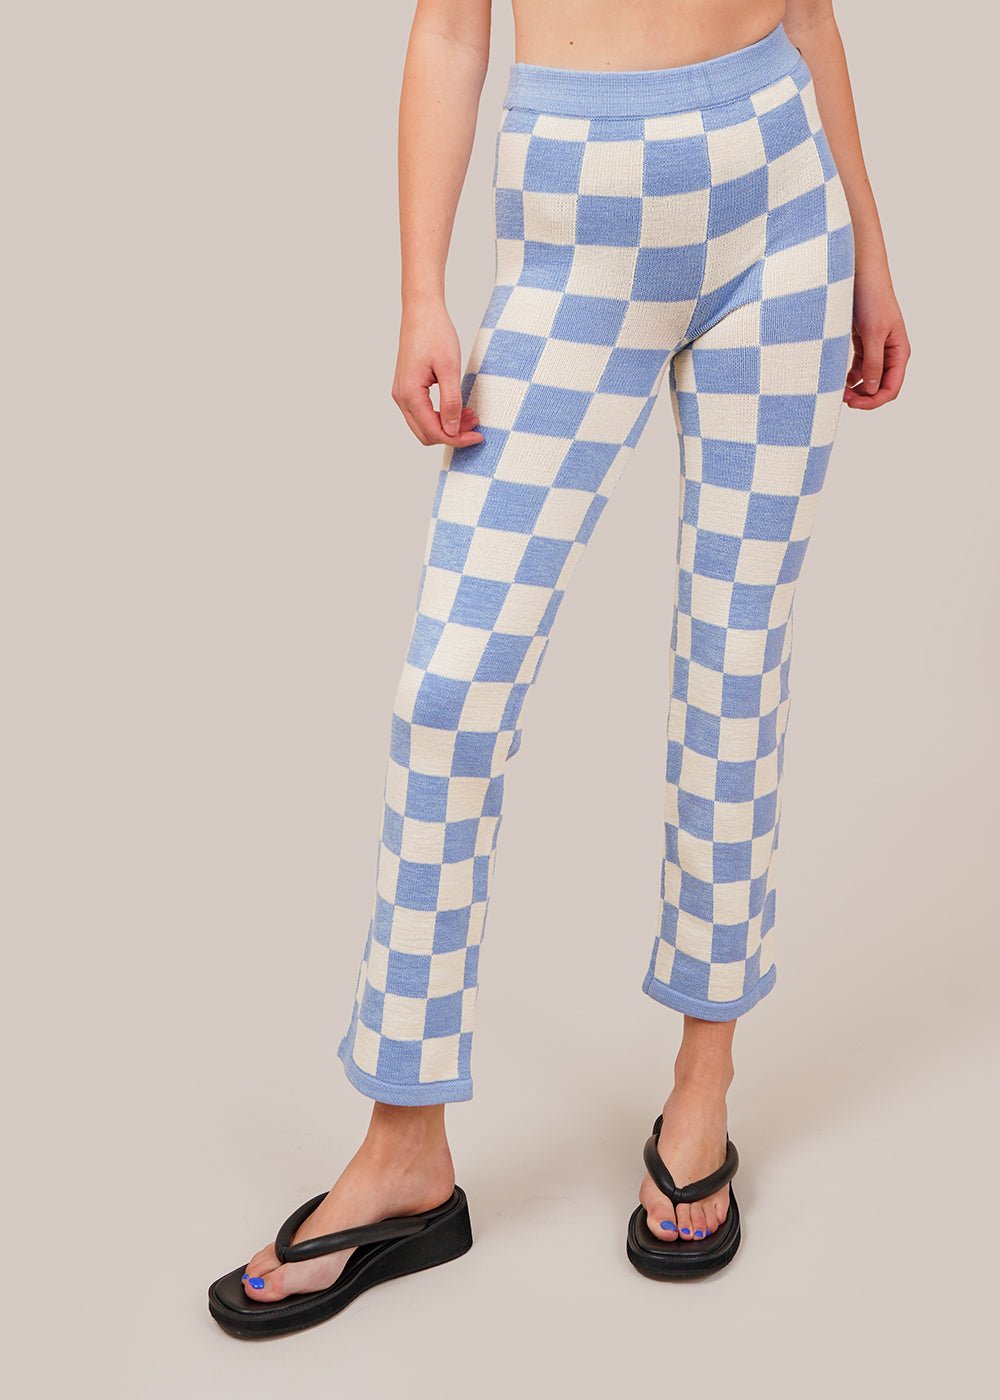 Checkered Teal Twill City Legging Pant